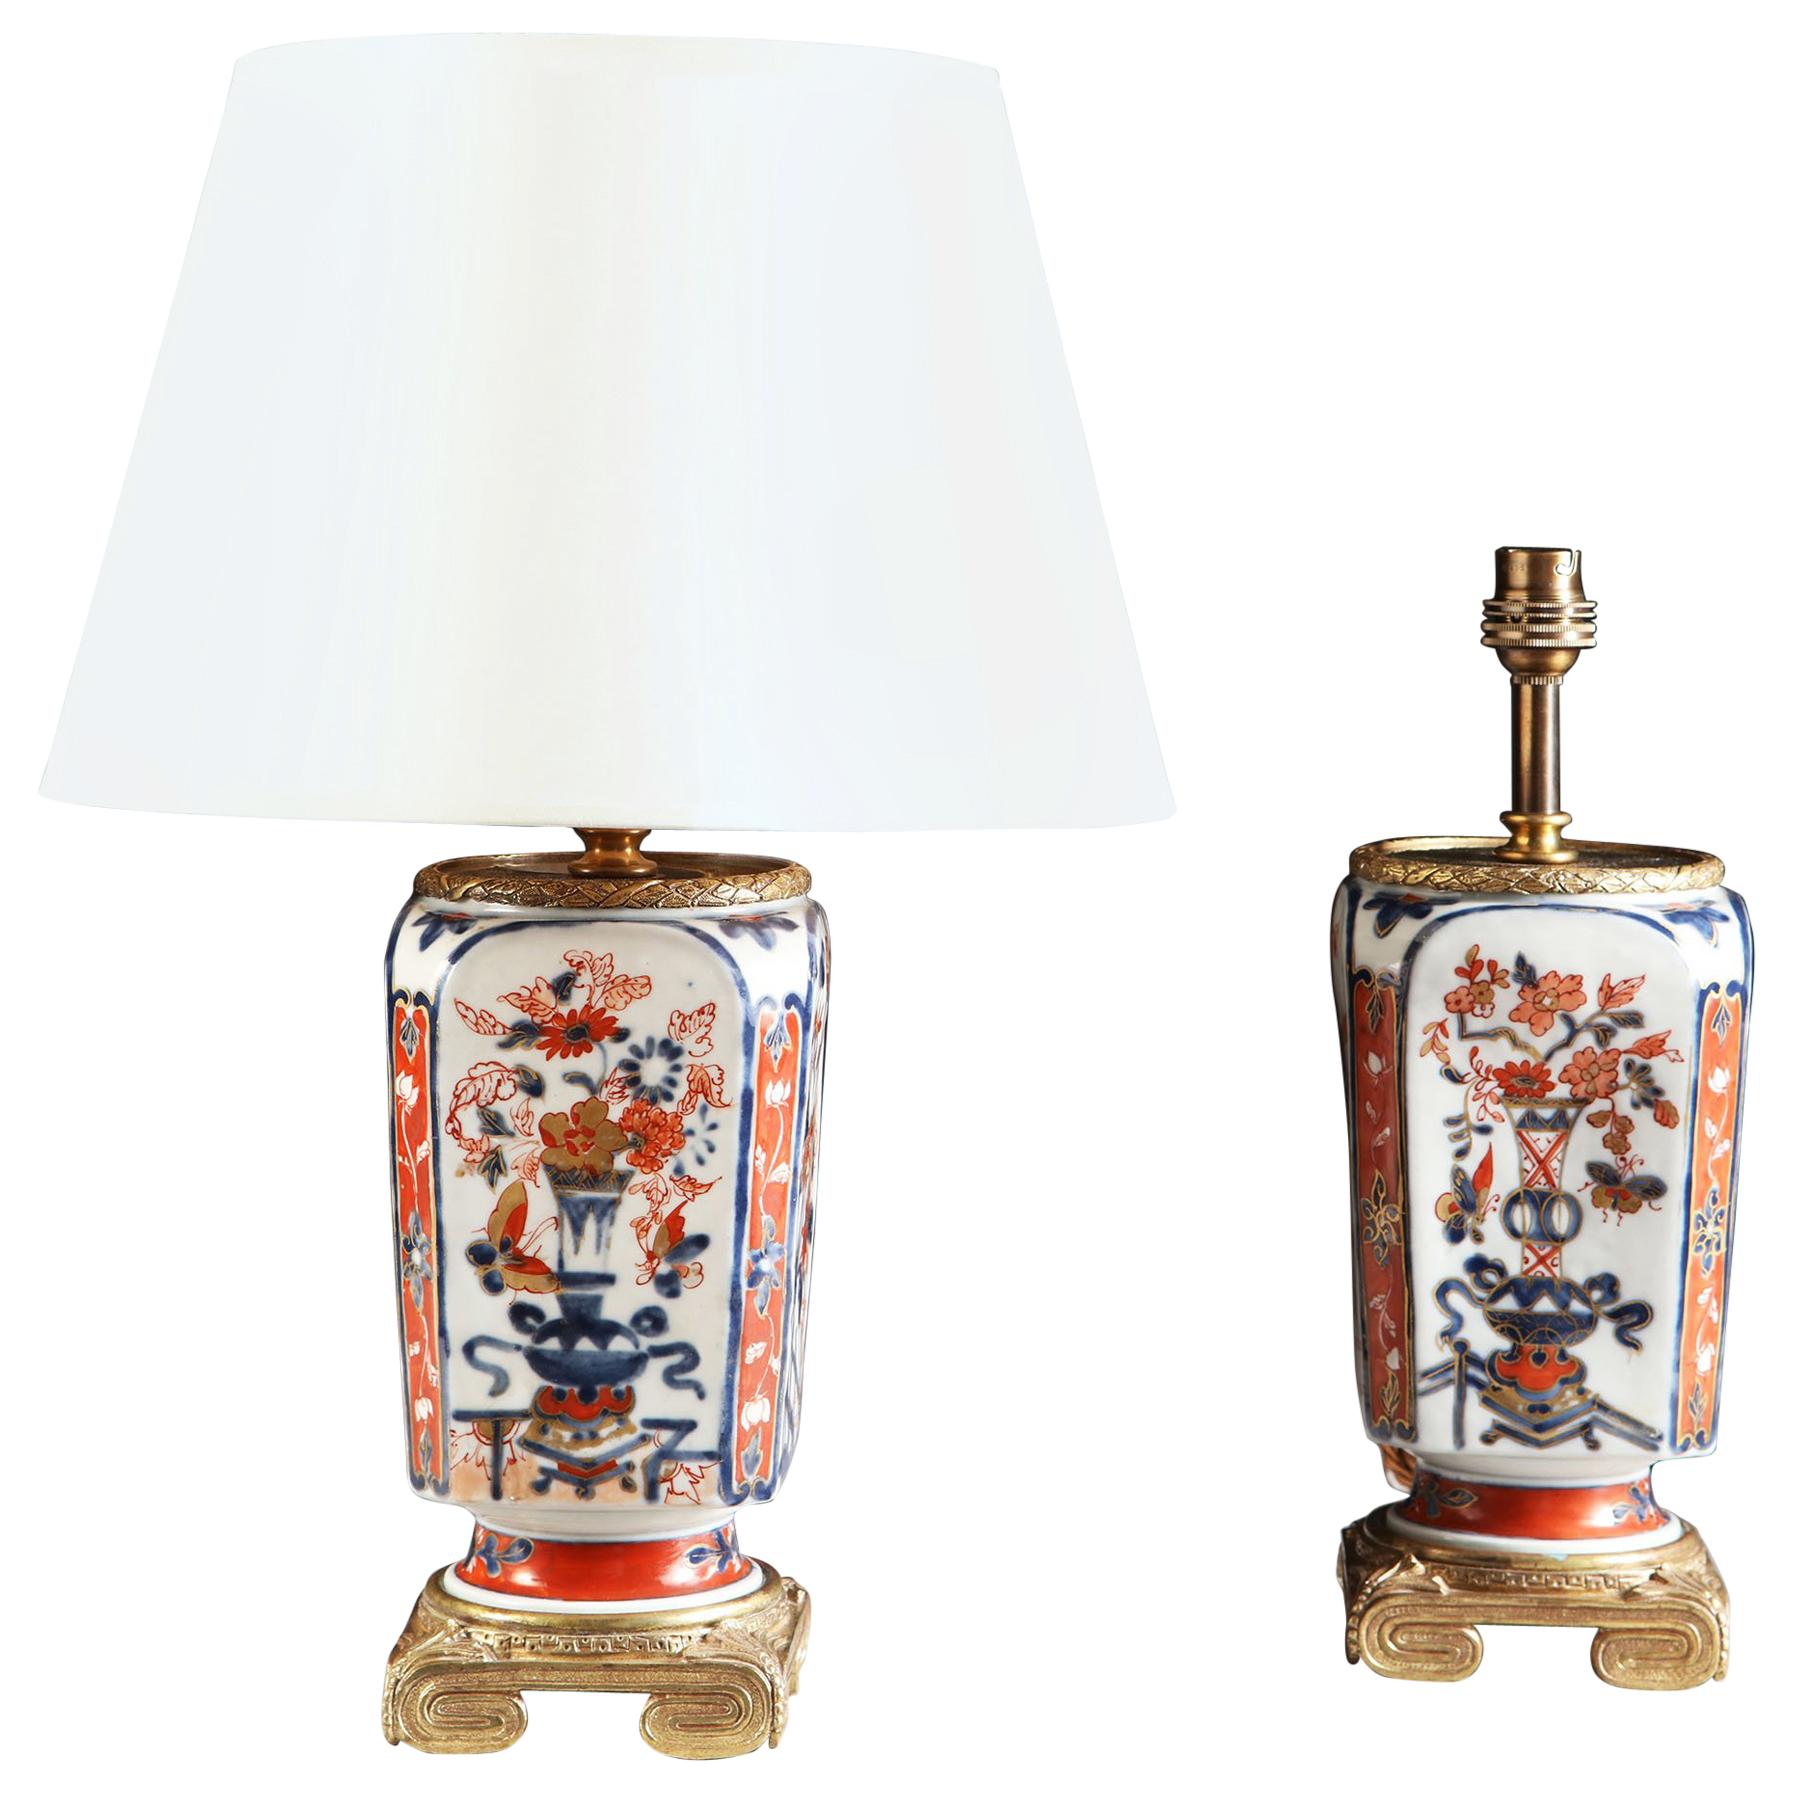 Pair of 19th Century Imari Vases as Table Lamps with Gilt Bronze Mounts